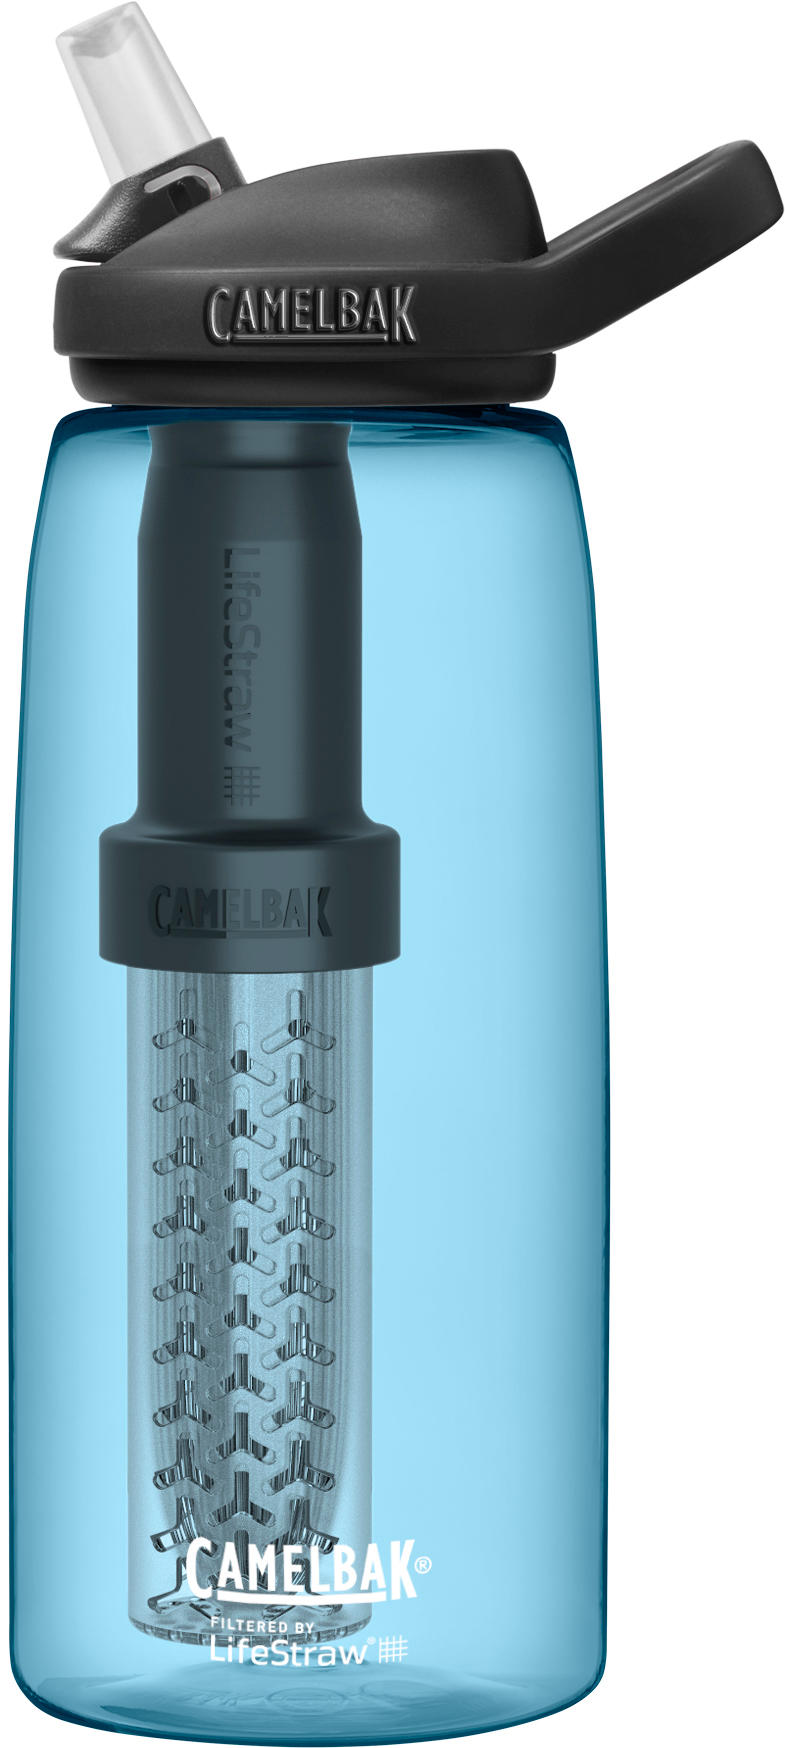 CAMELBAK Eddy®+ Filtered by LifeStraw® 1L - Trinkflasche